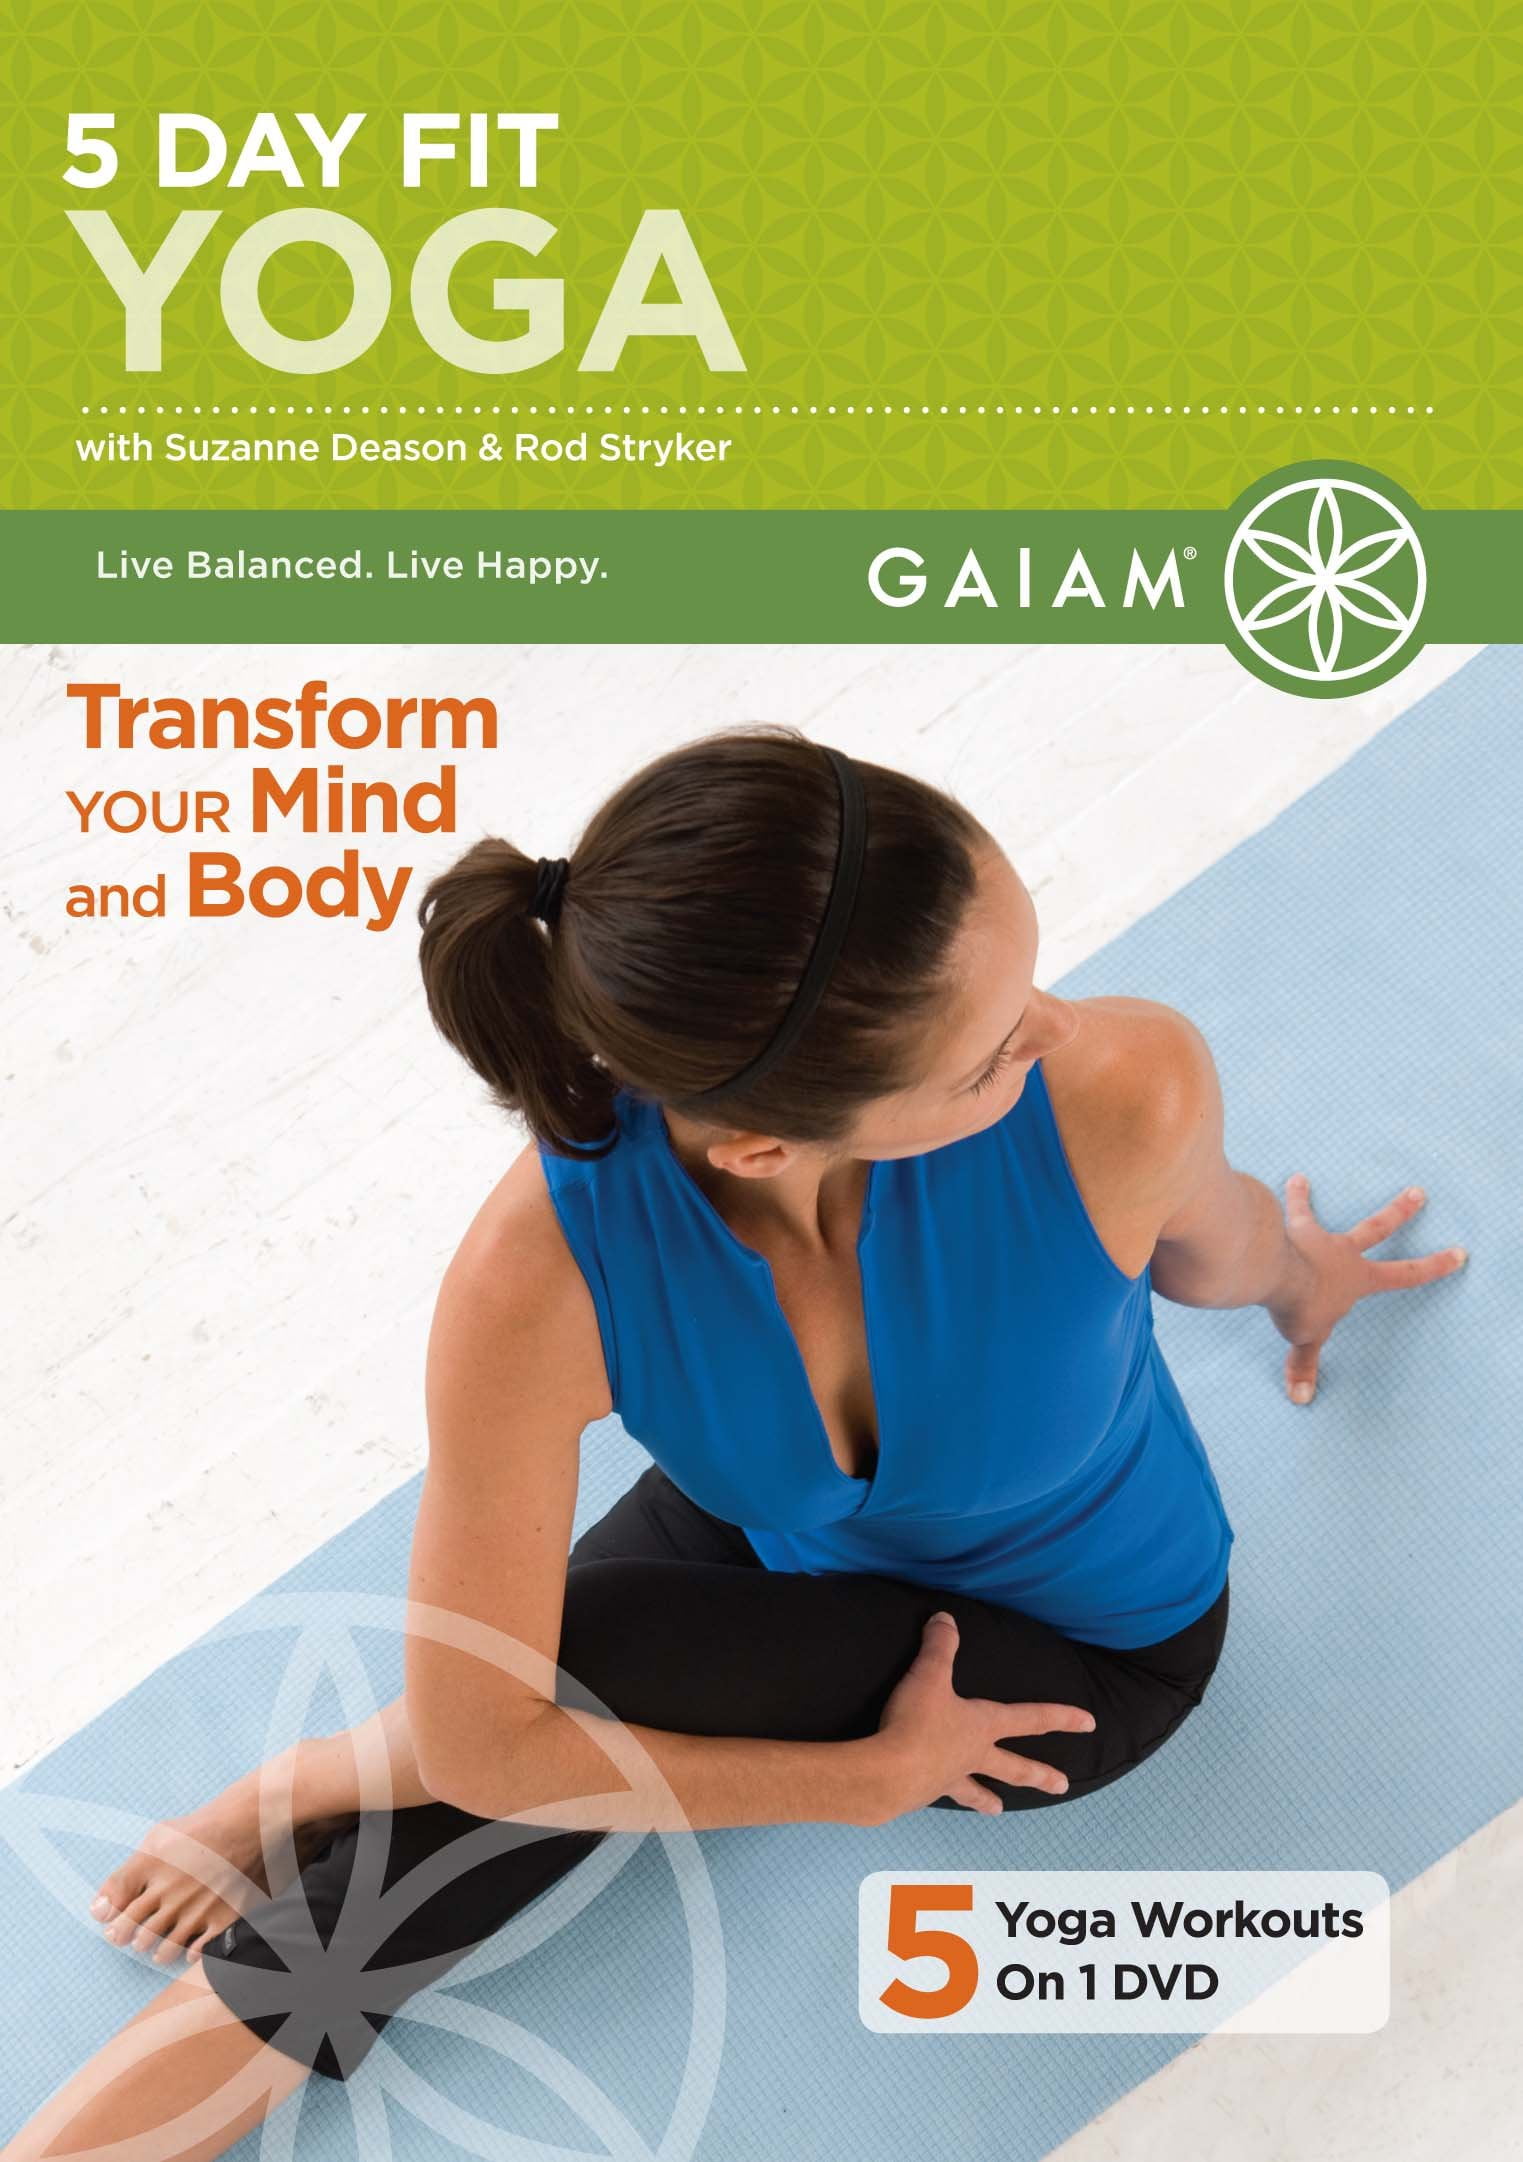 Yoga for Weight Loss - Gaiam TV Fit Yoga